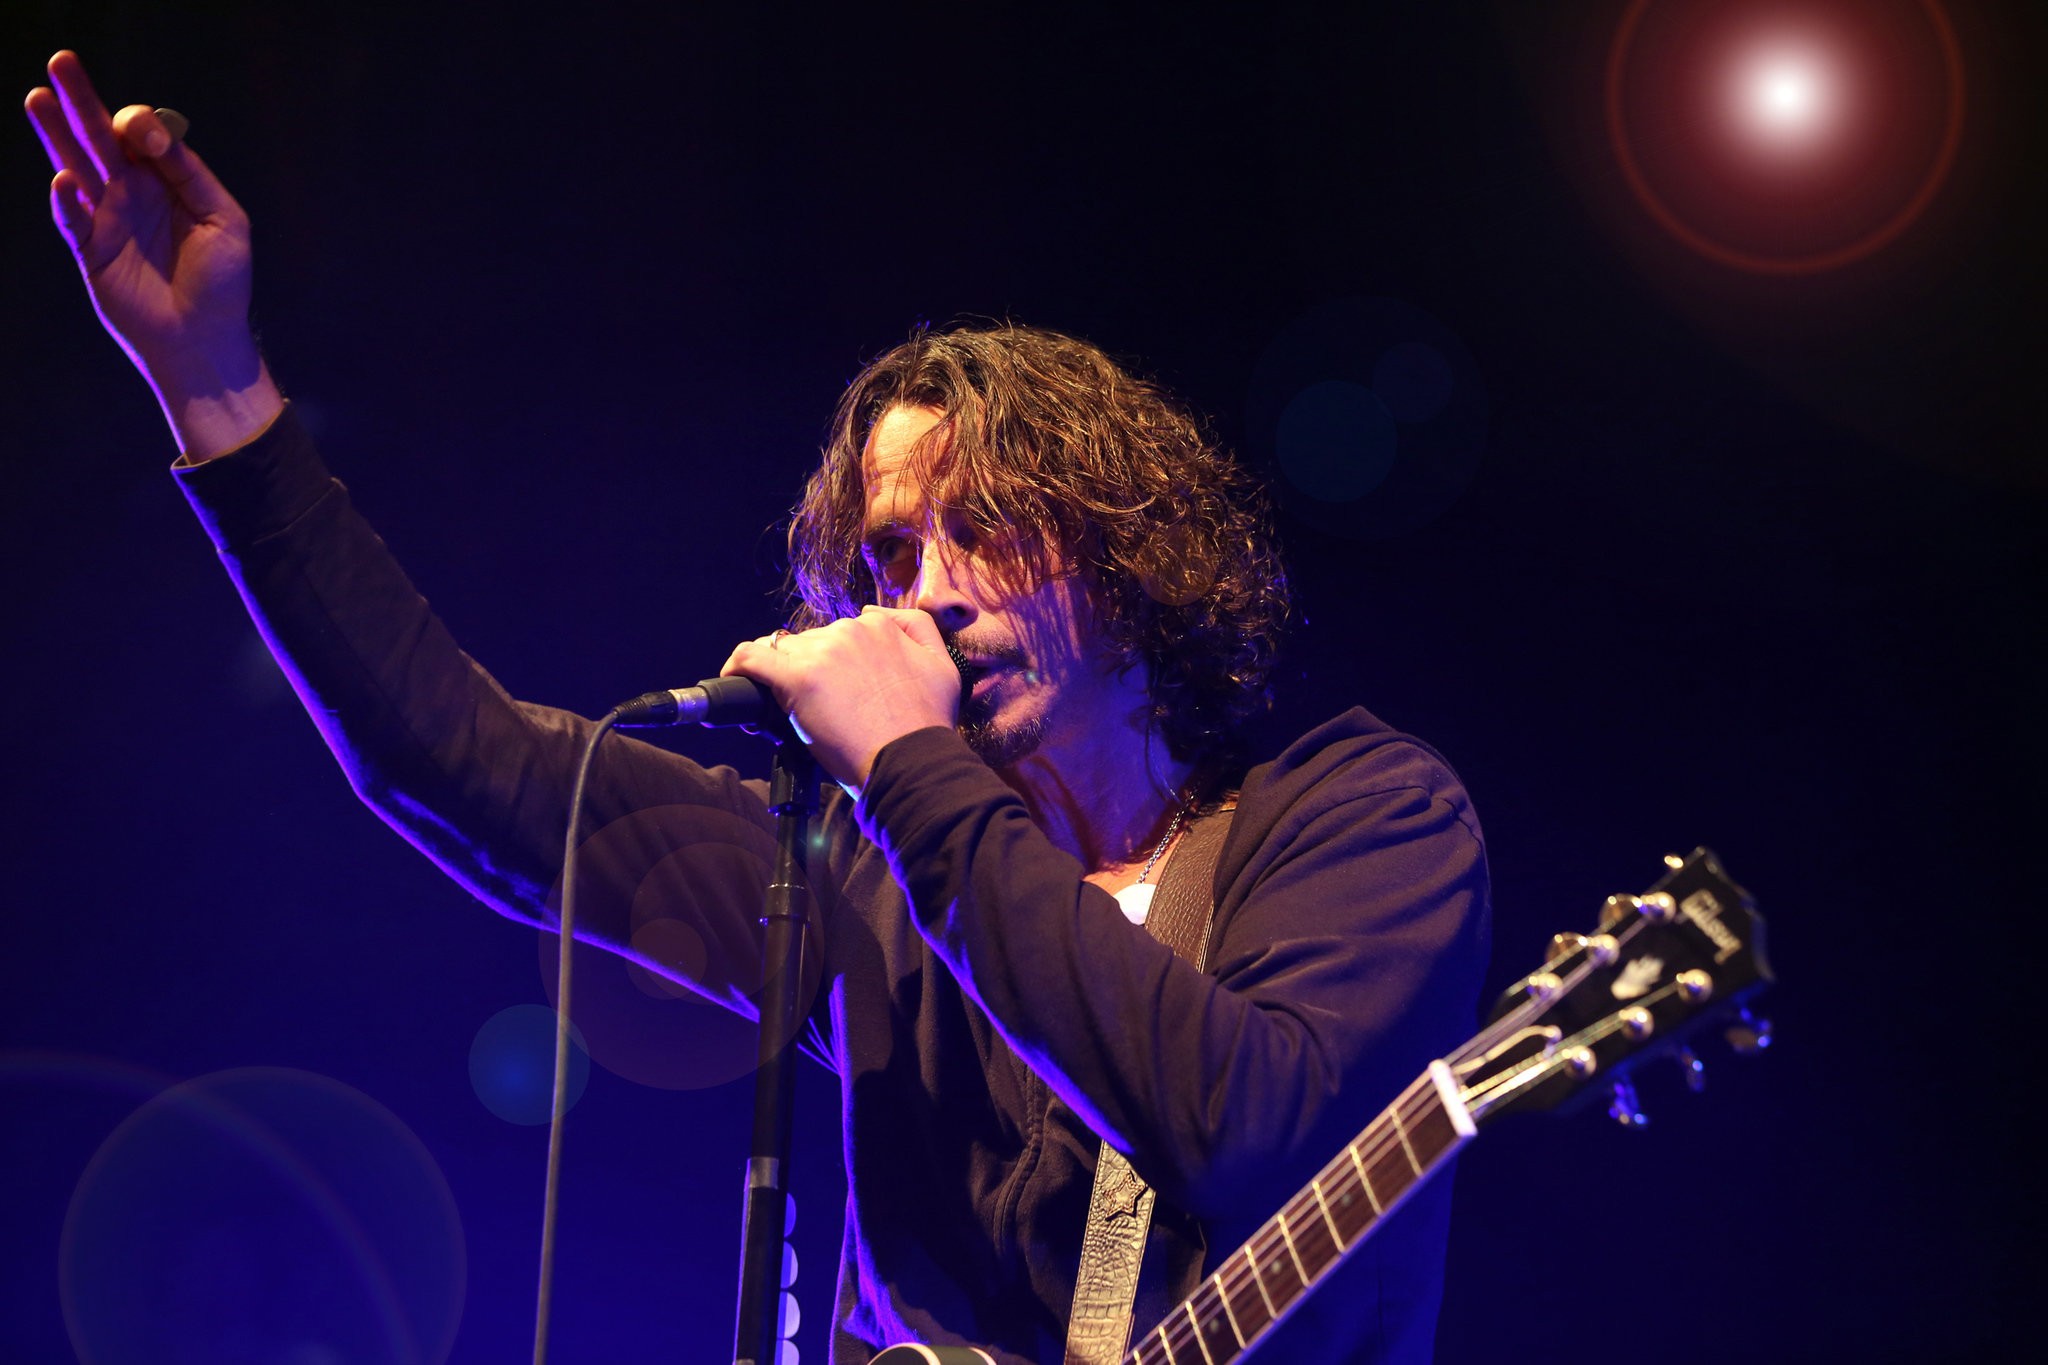 Chris Cornell 90s: The Voice of Grunge and Alternative Rock